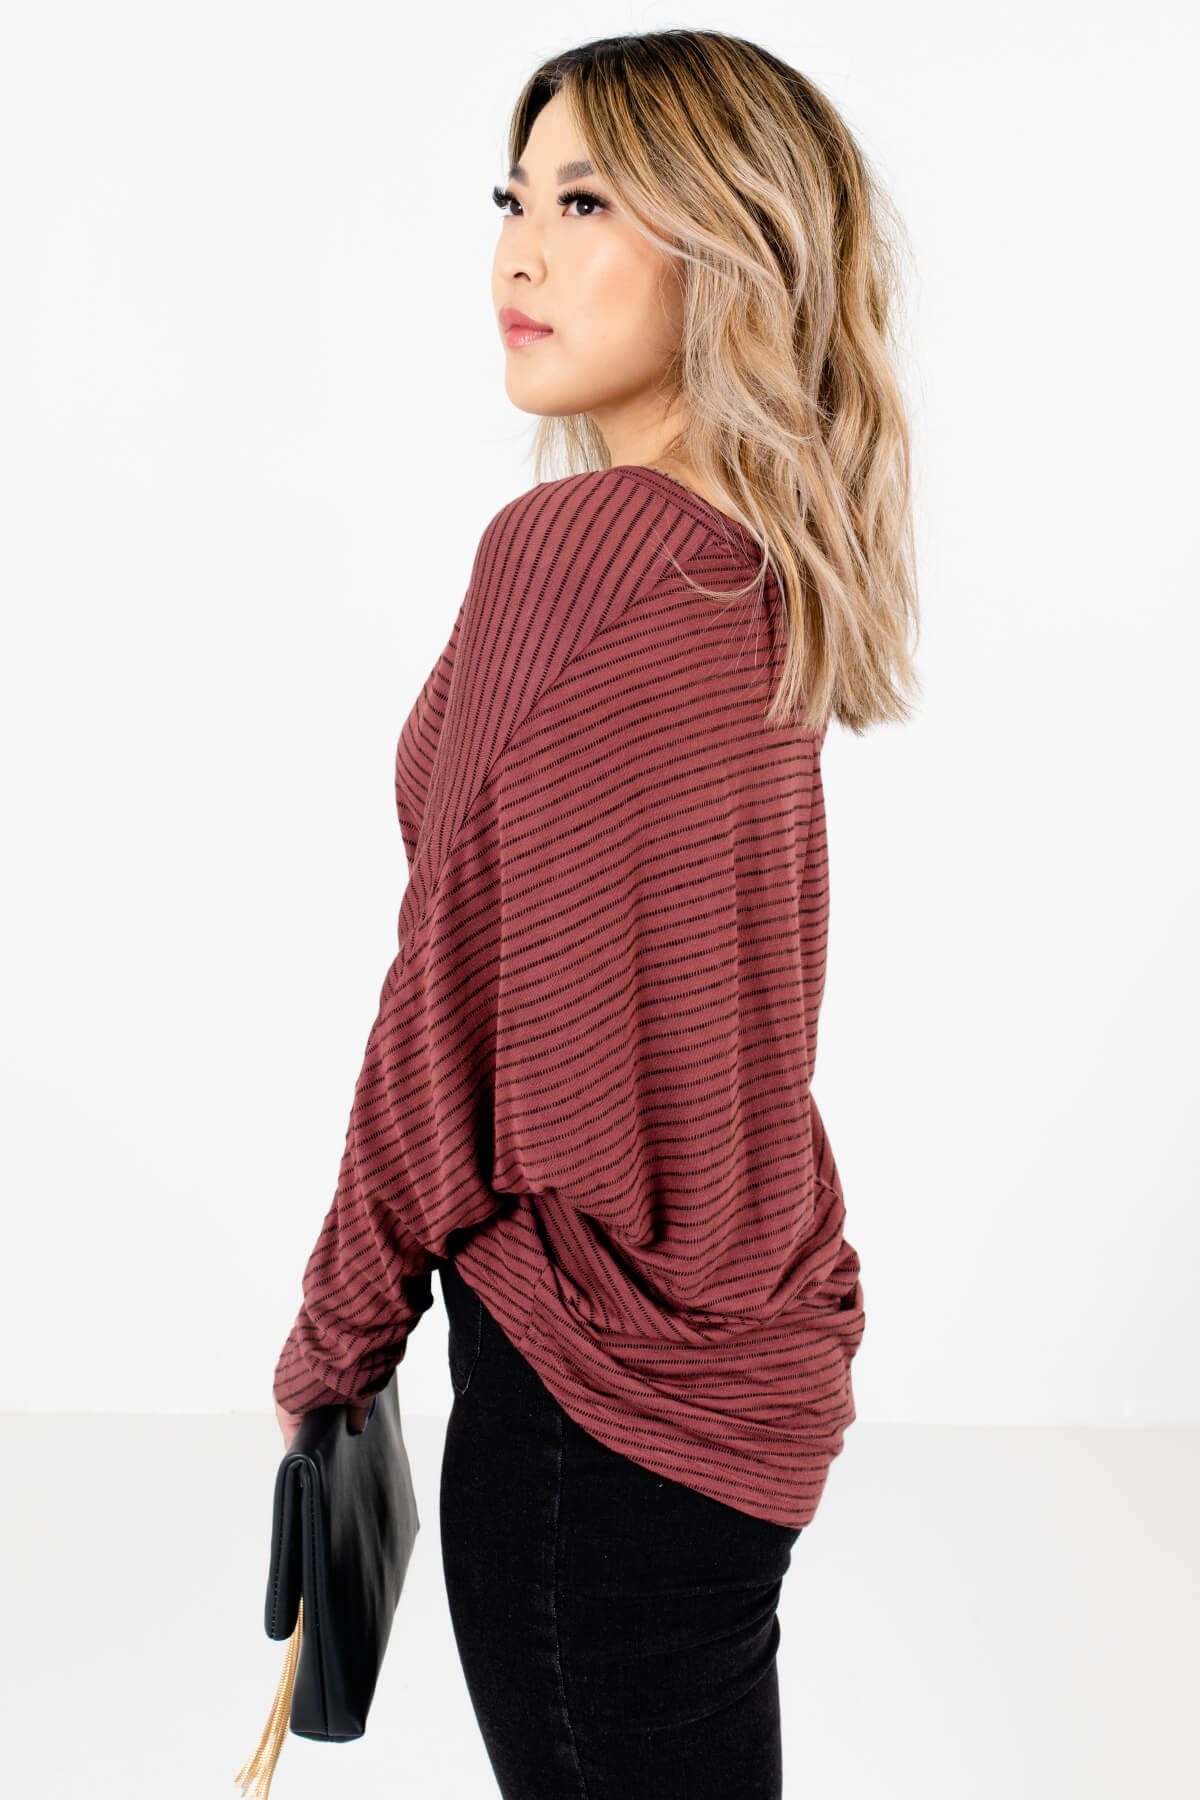 Mauve Oversized Relaxed Fit Boutique Tops for Women